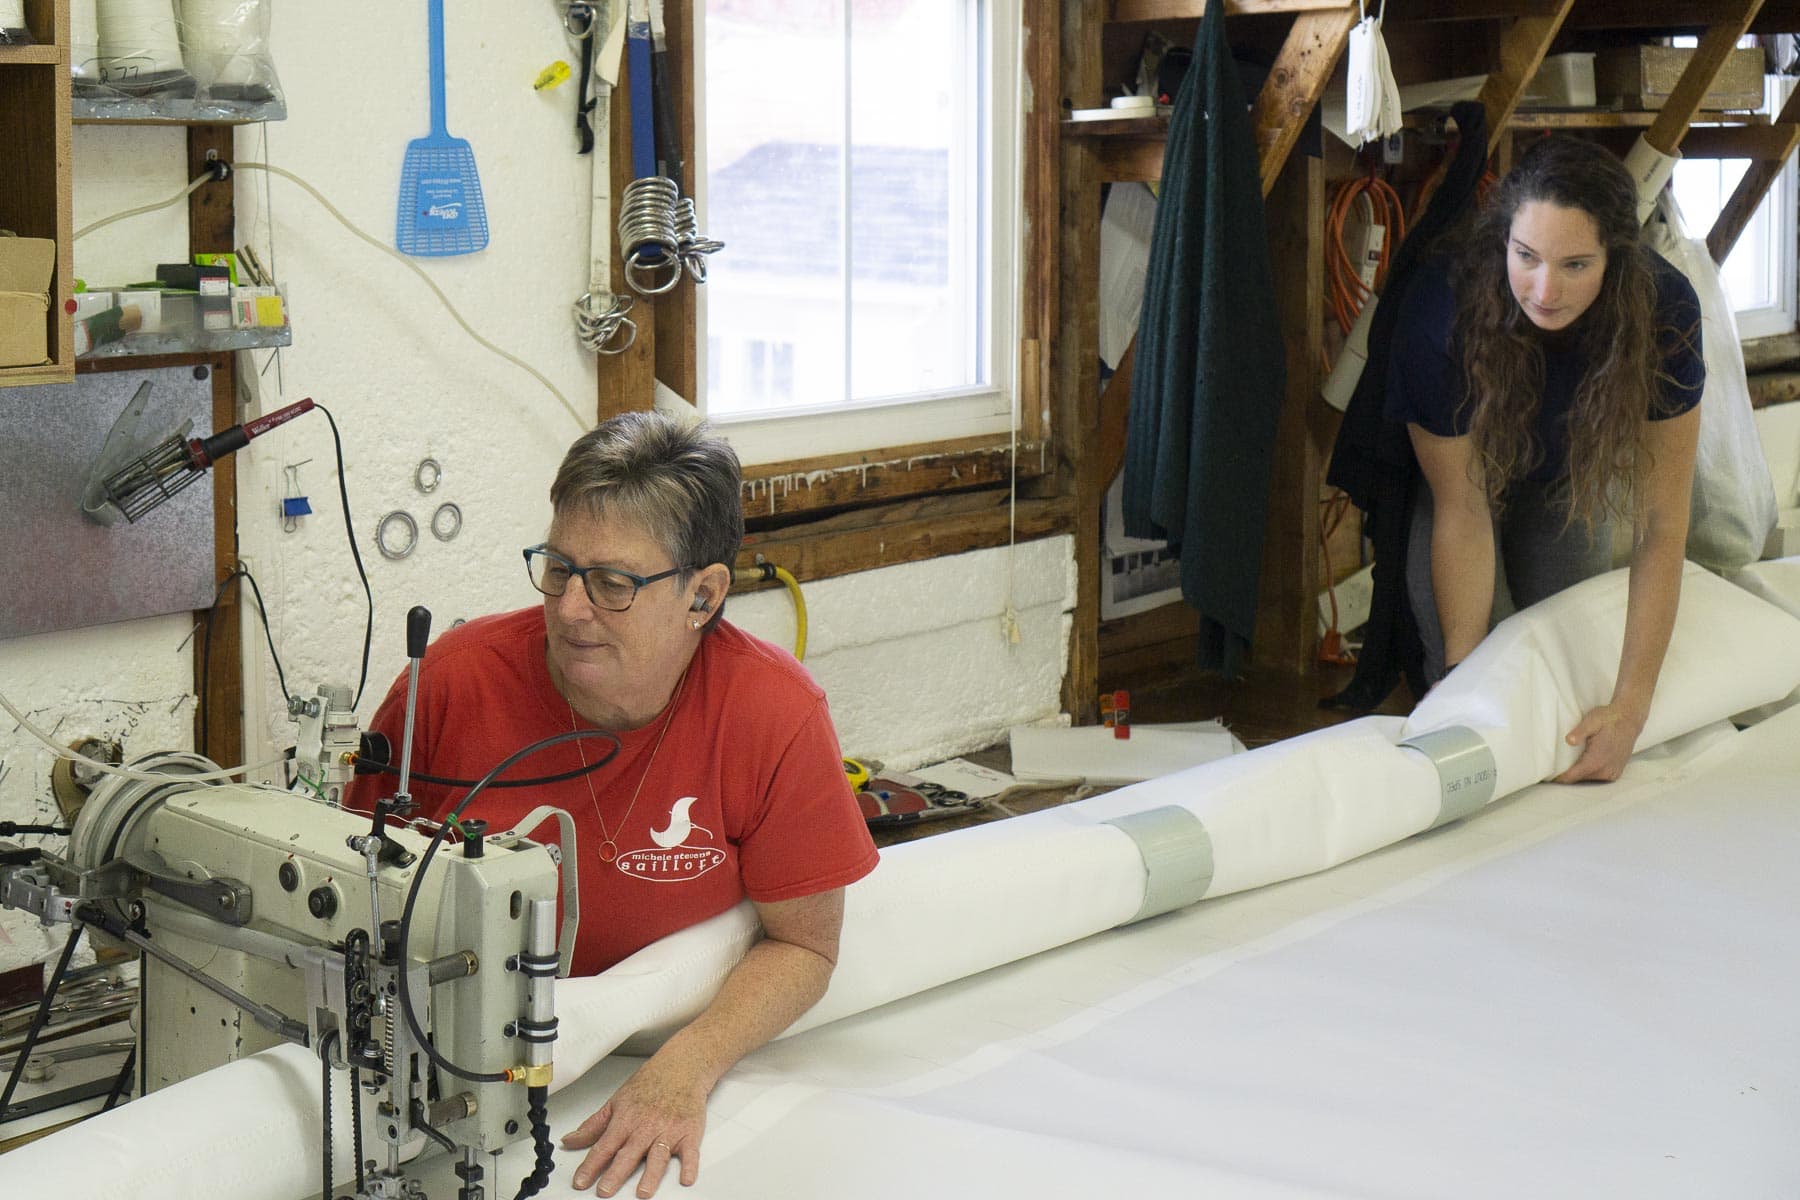 image description: two people working on an enormous piece of white fabric - one is operating a sewing machine, the other is holding a roll of the fabric, guiding it and supporting its weight